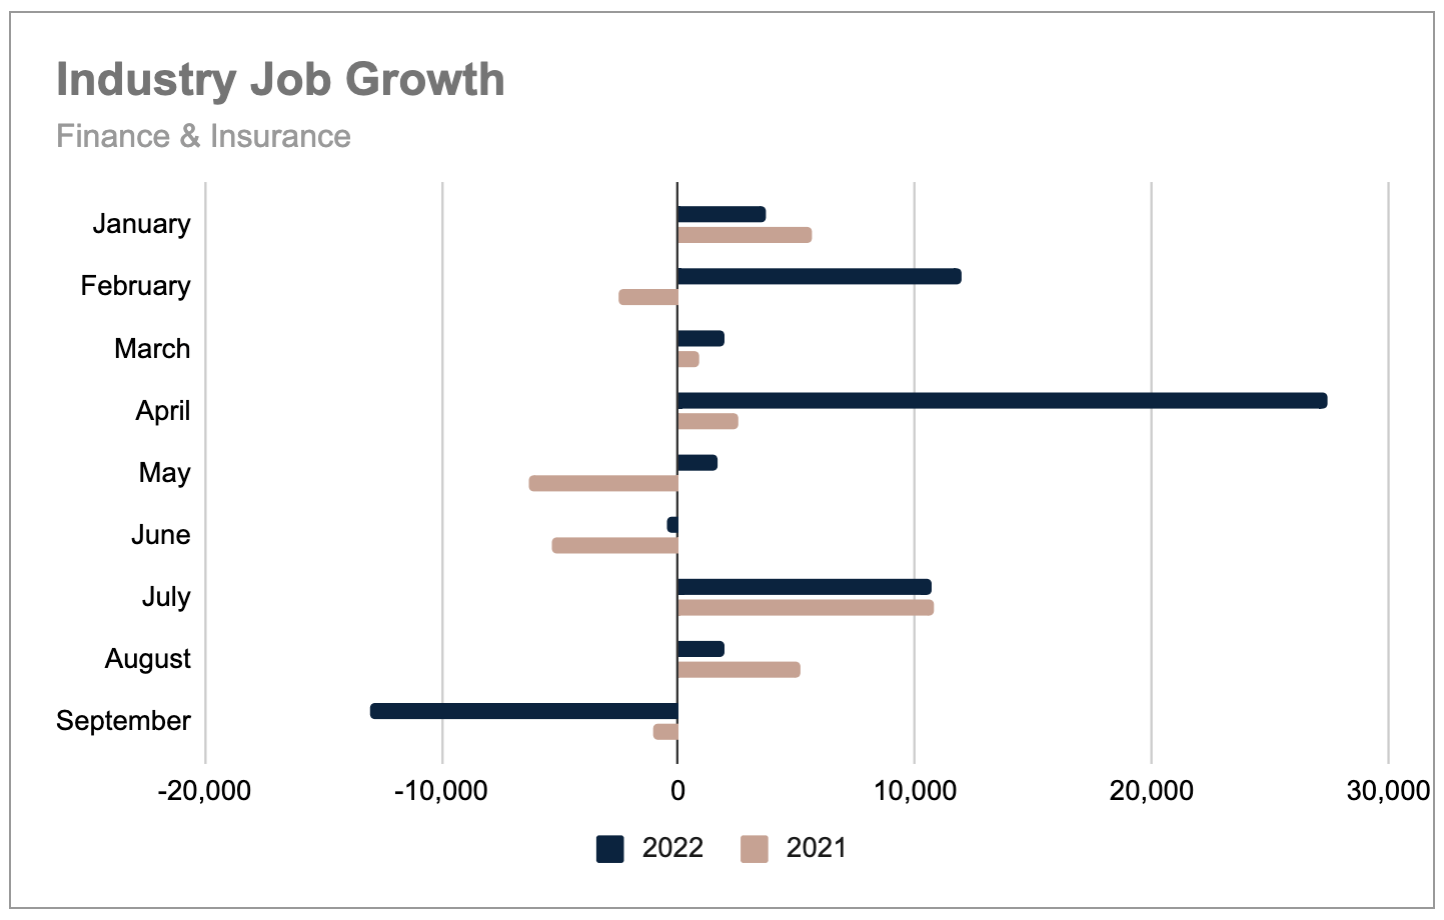 Industry job growth, finance and insurance